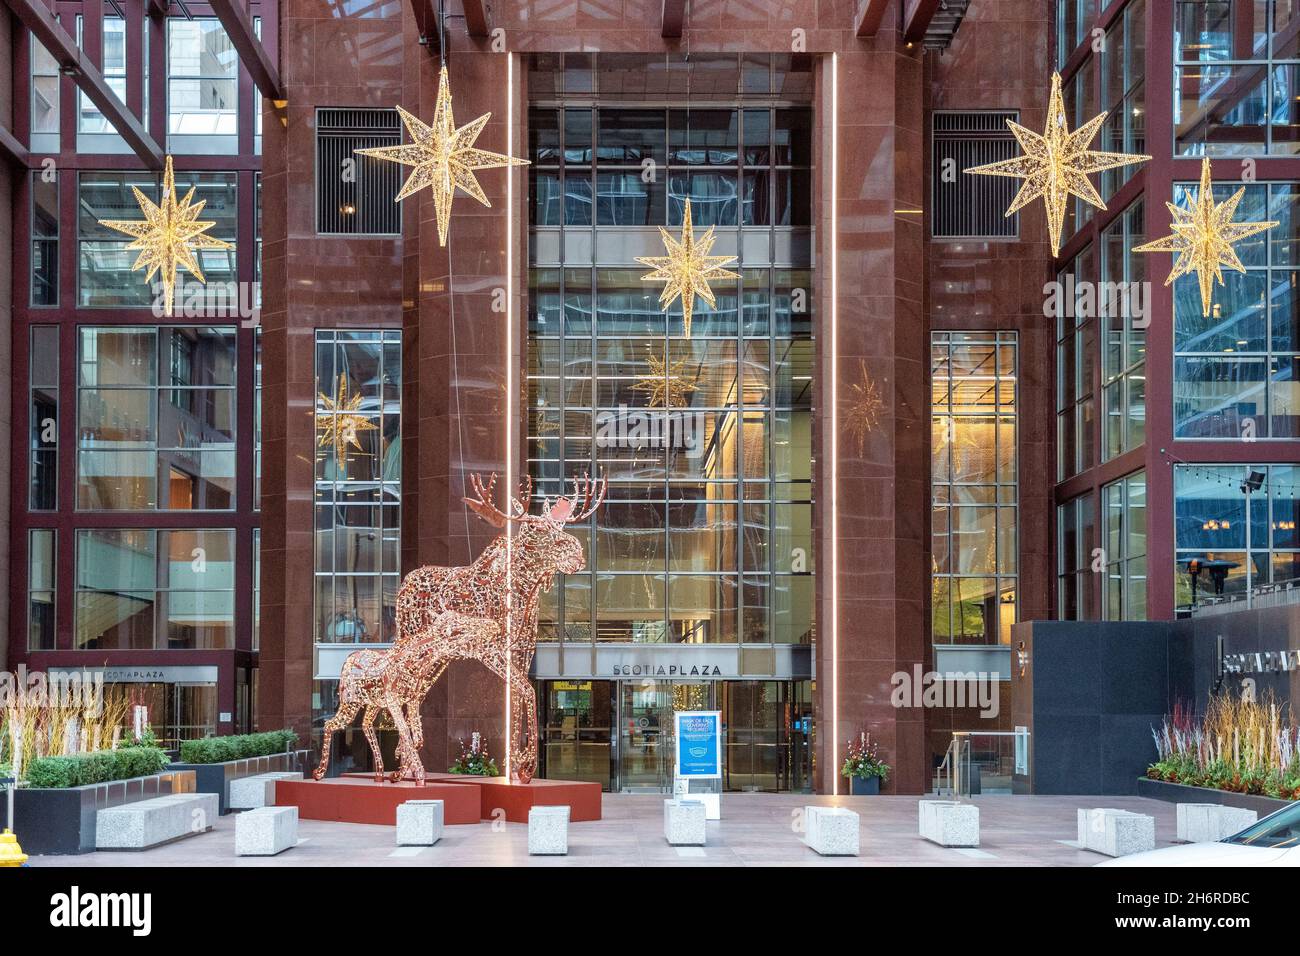 Christmas decorations in the Scotiabank Plaza located in Adelaide Street in the downtown district in Toronto, Canada. Nov. 17, 2021 Stock Photo